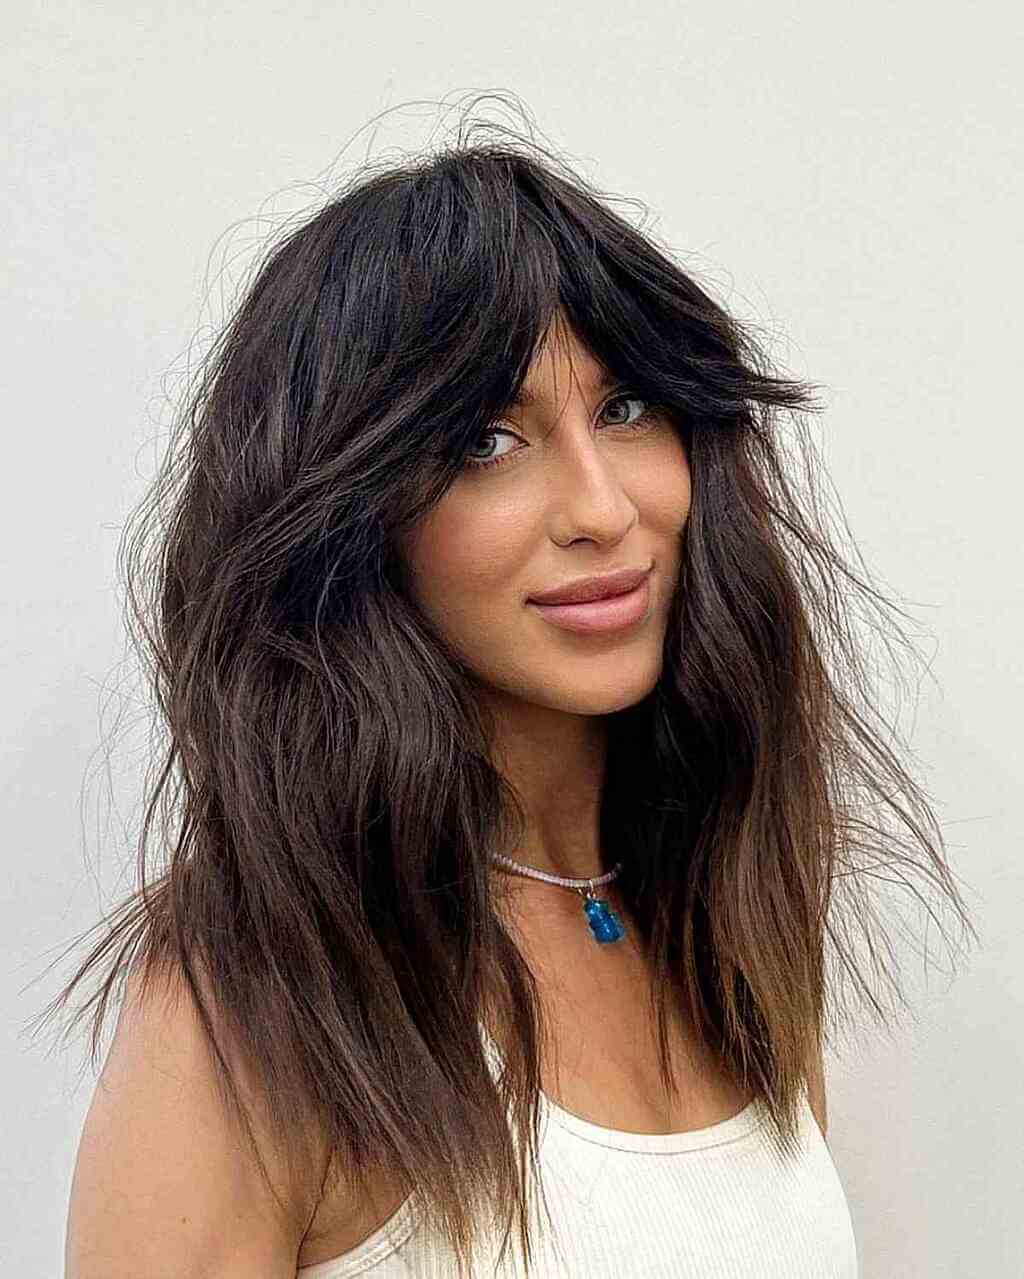 How to style dry long hair with curtain bangs?